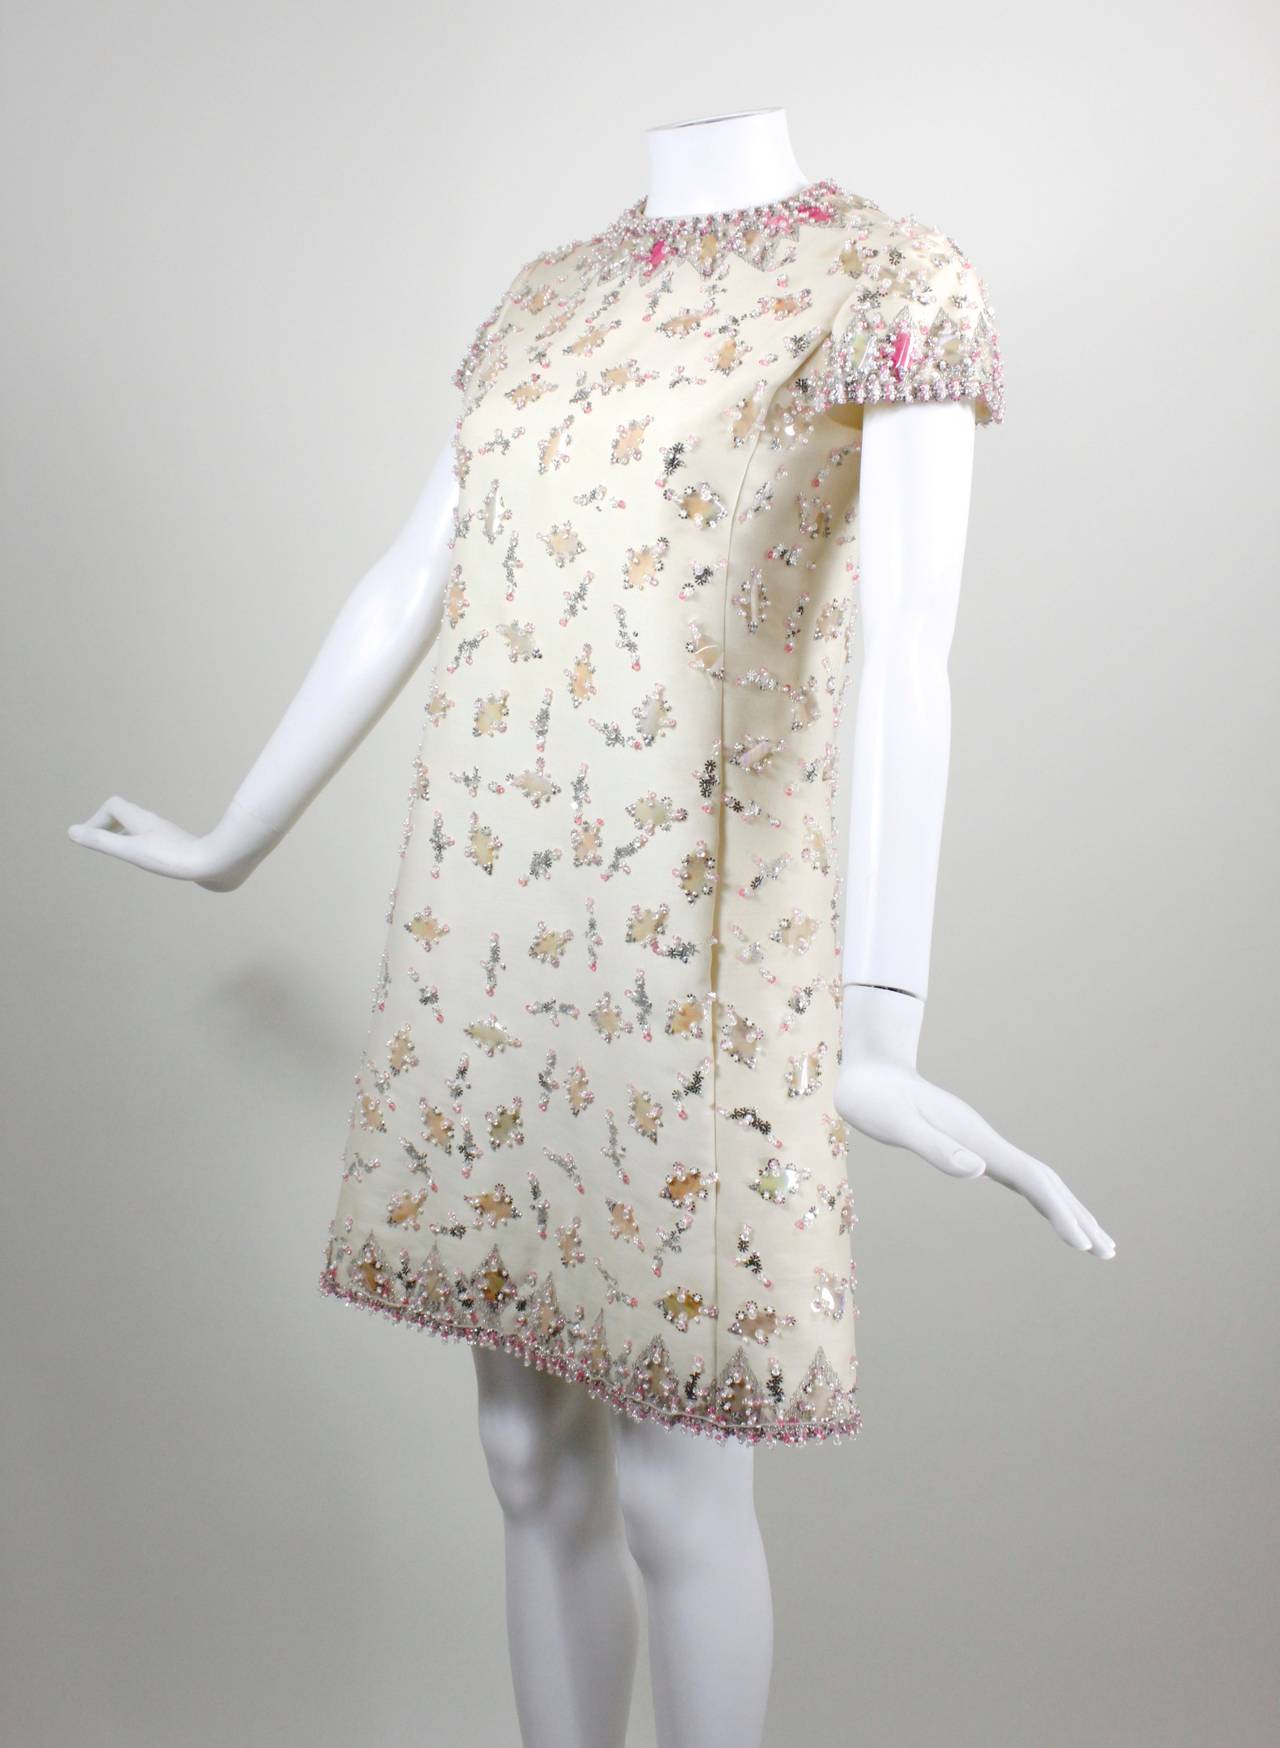 Women's 1960s Malcolm Starr Cream Party Dress with Blush Paillettes